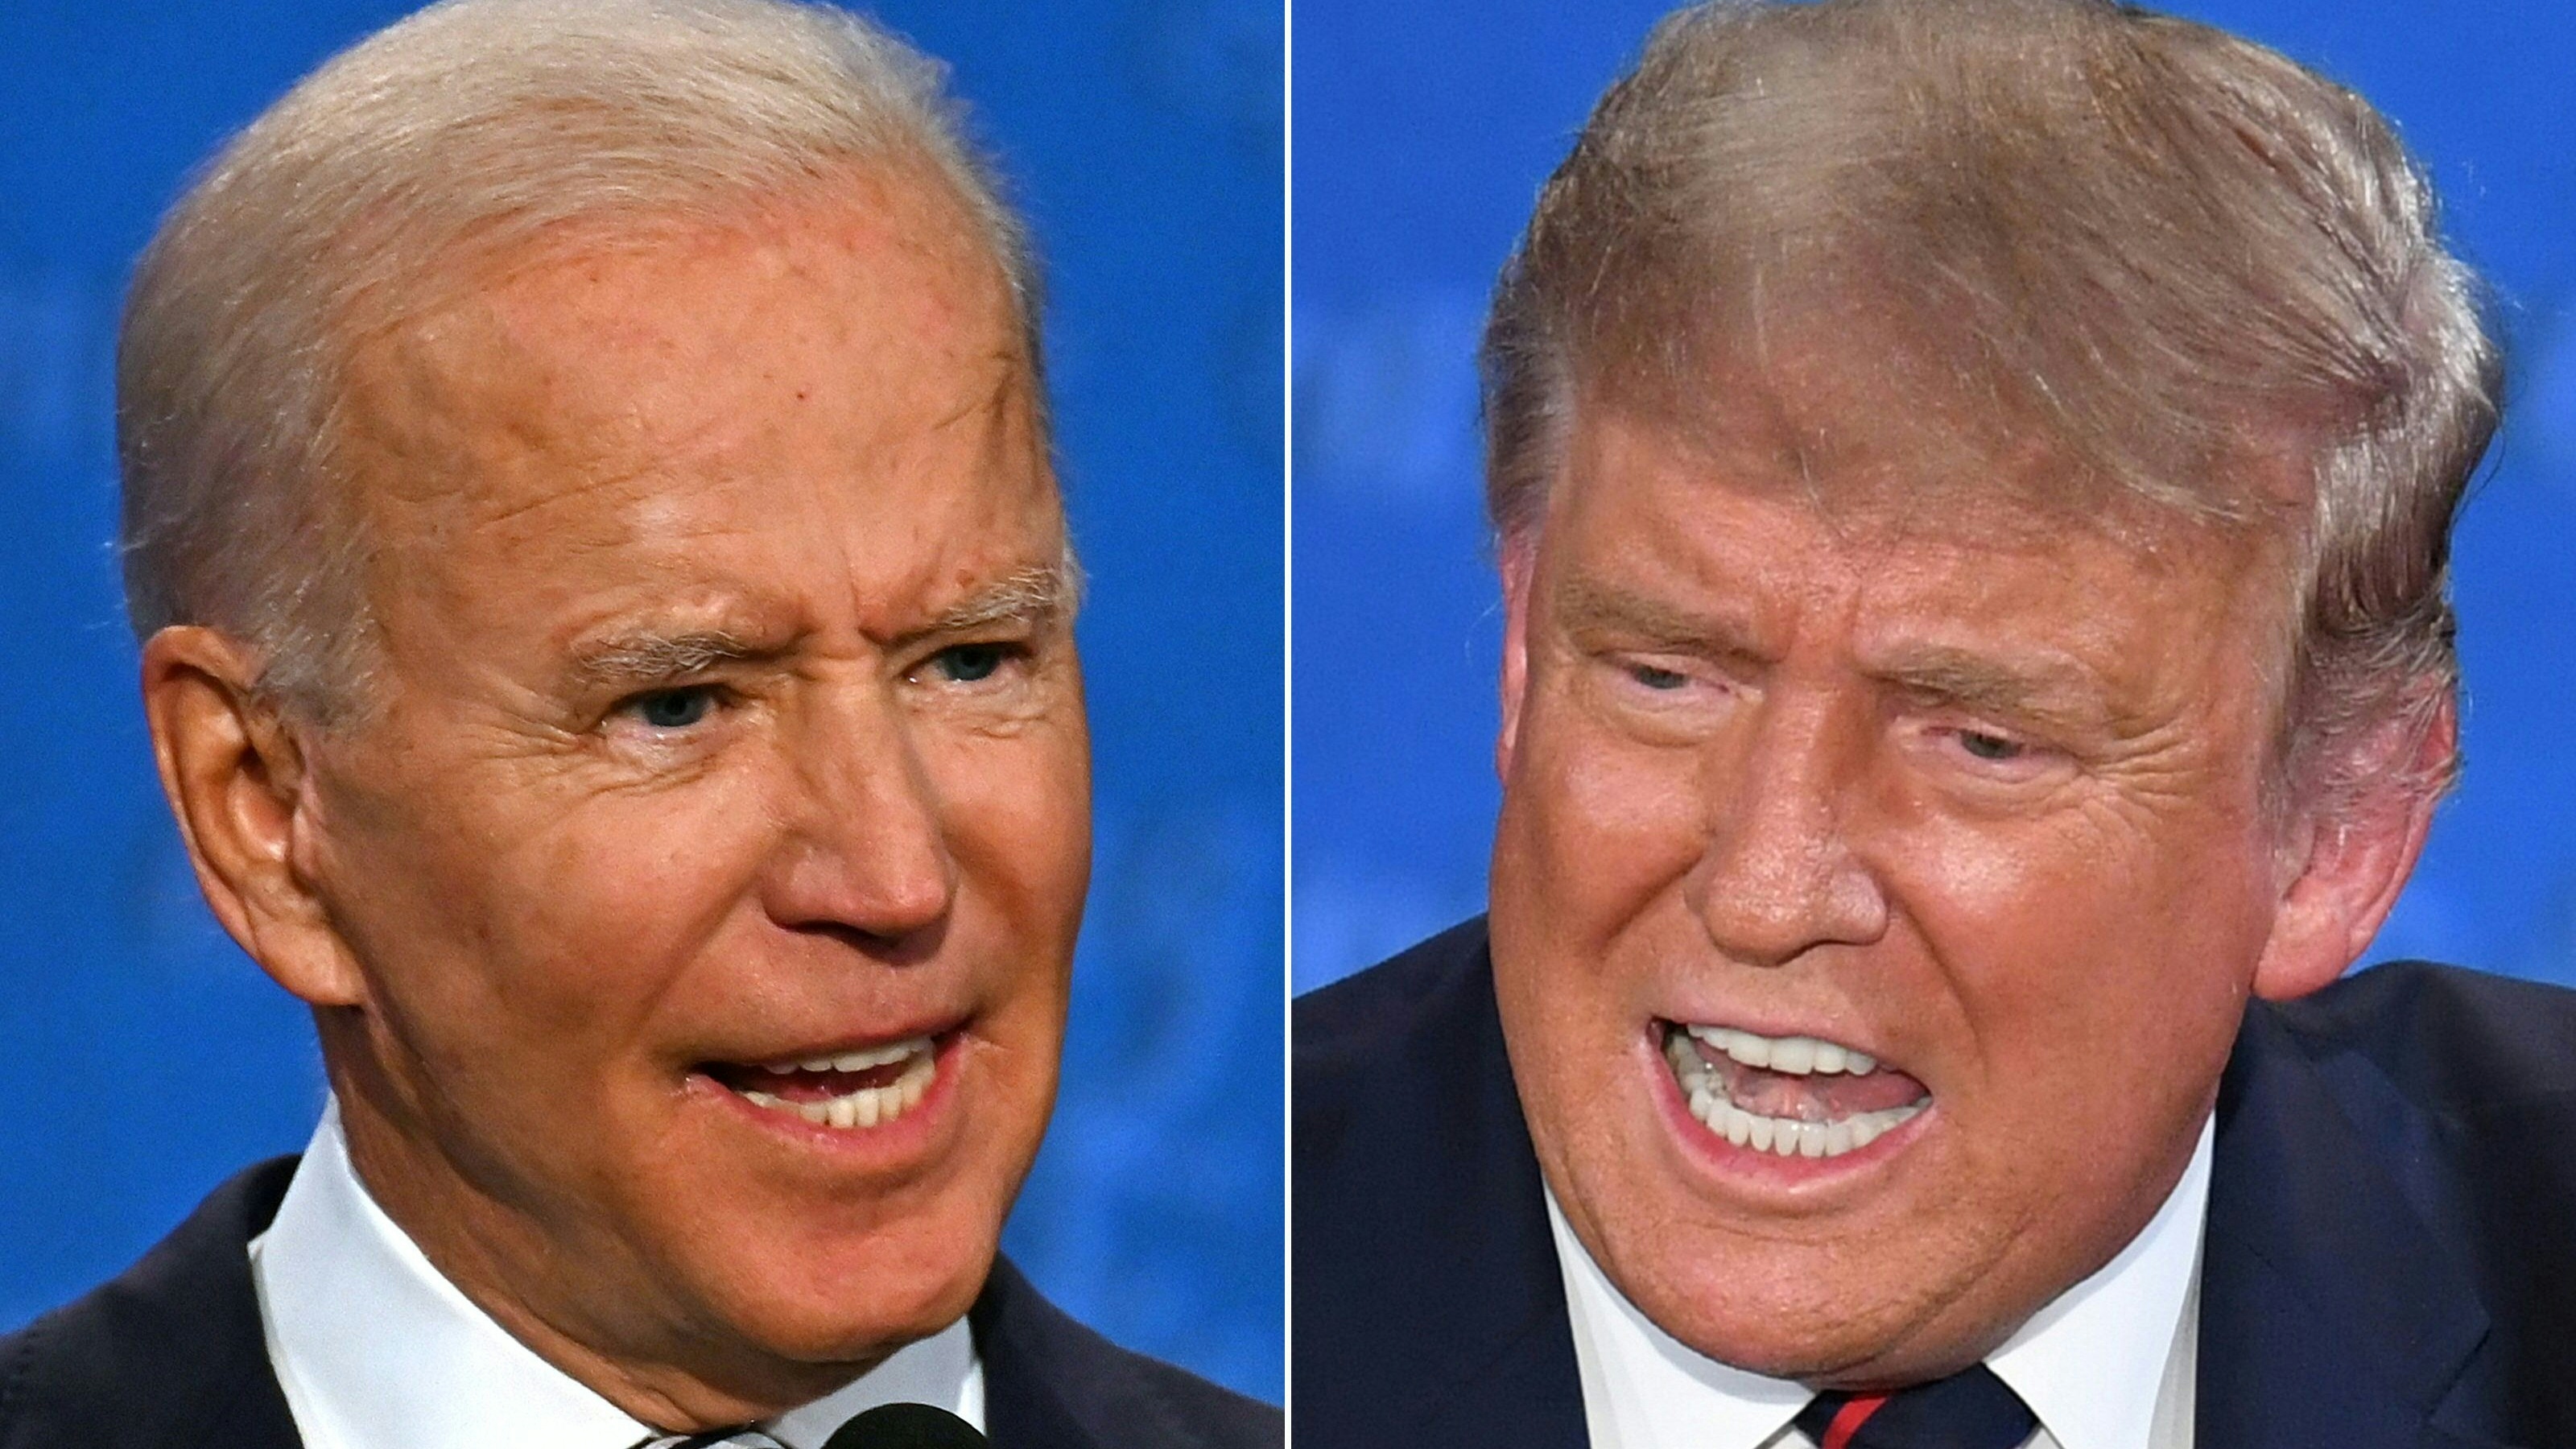 Democratic Presidential candidate and former US Vice President Joe Biden (L) and US President Donald Trump speaking during the first presidential debate